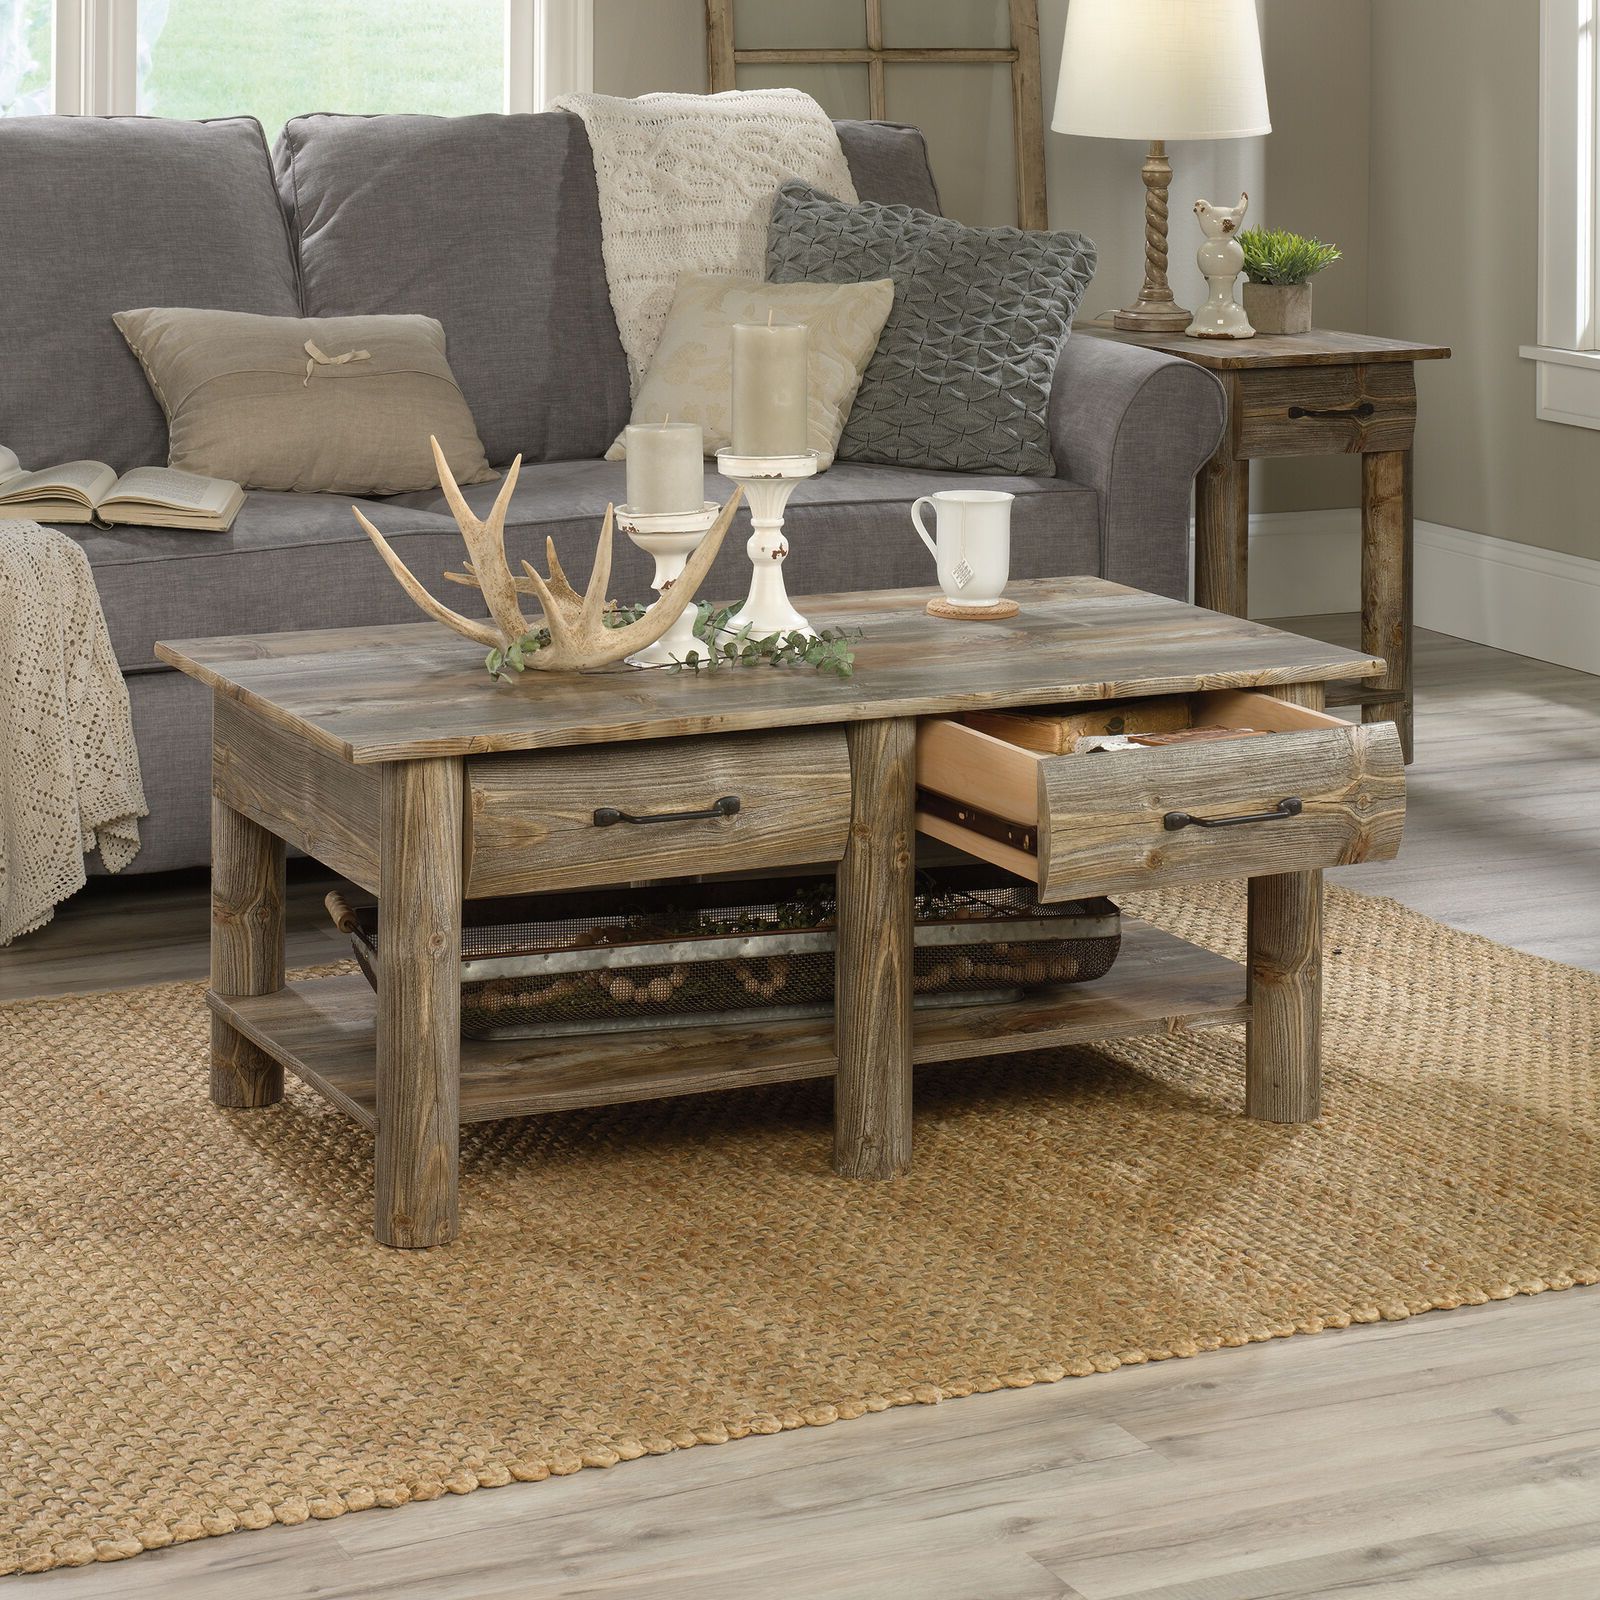 Coffee Table Rustic Farmhouse Storage Faux Drawer Wood Log Living Room For Living Room Farmhouse Coffee Tables (View 16 of 20)